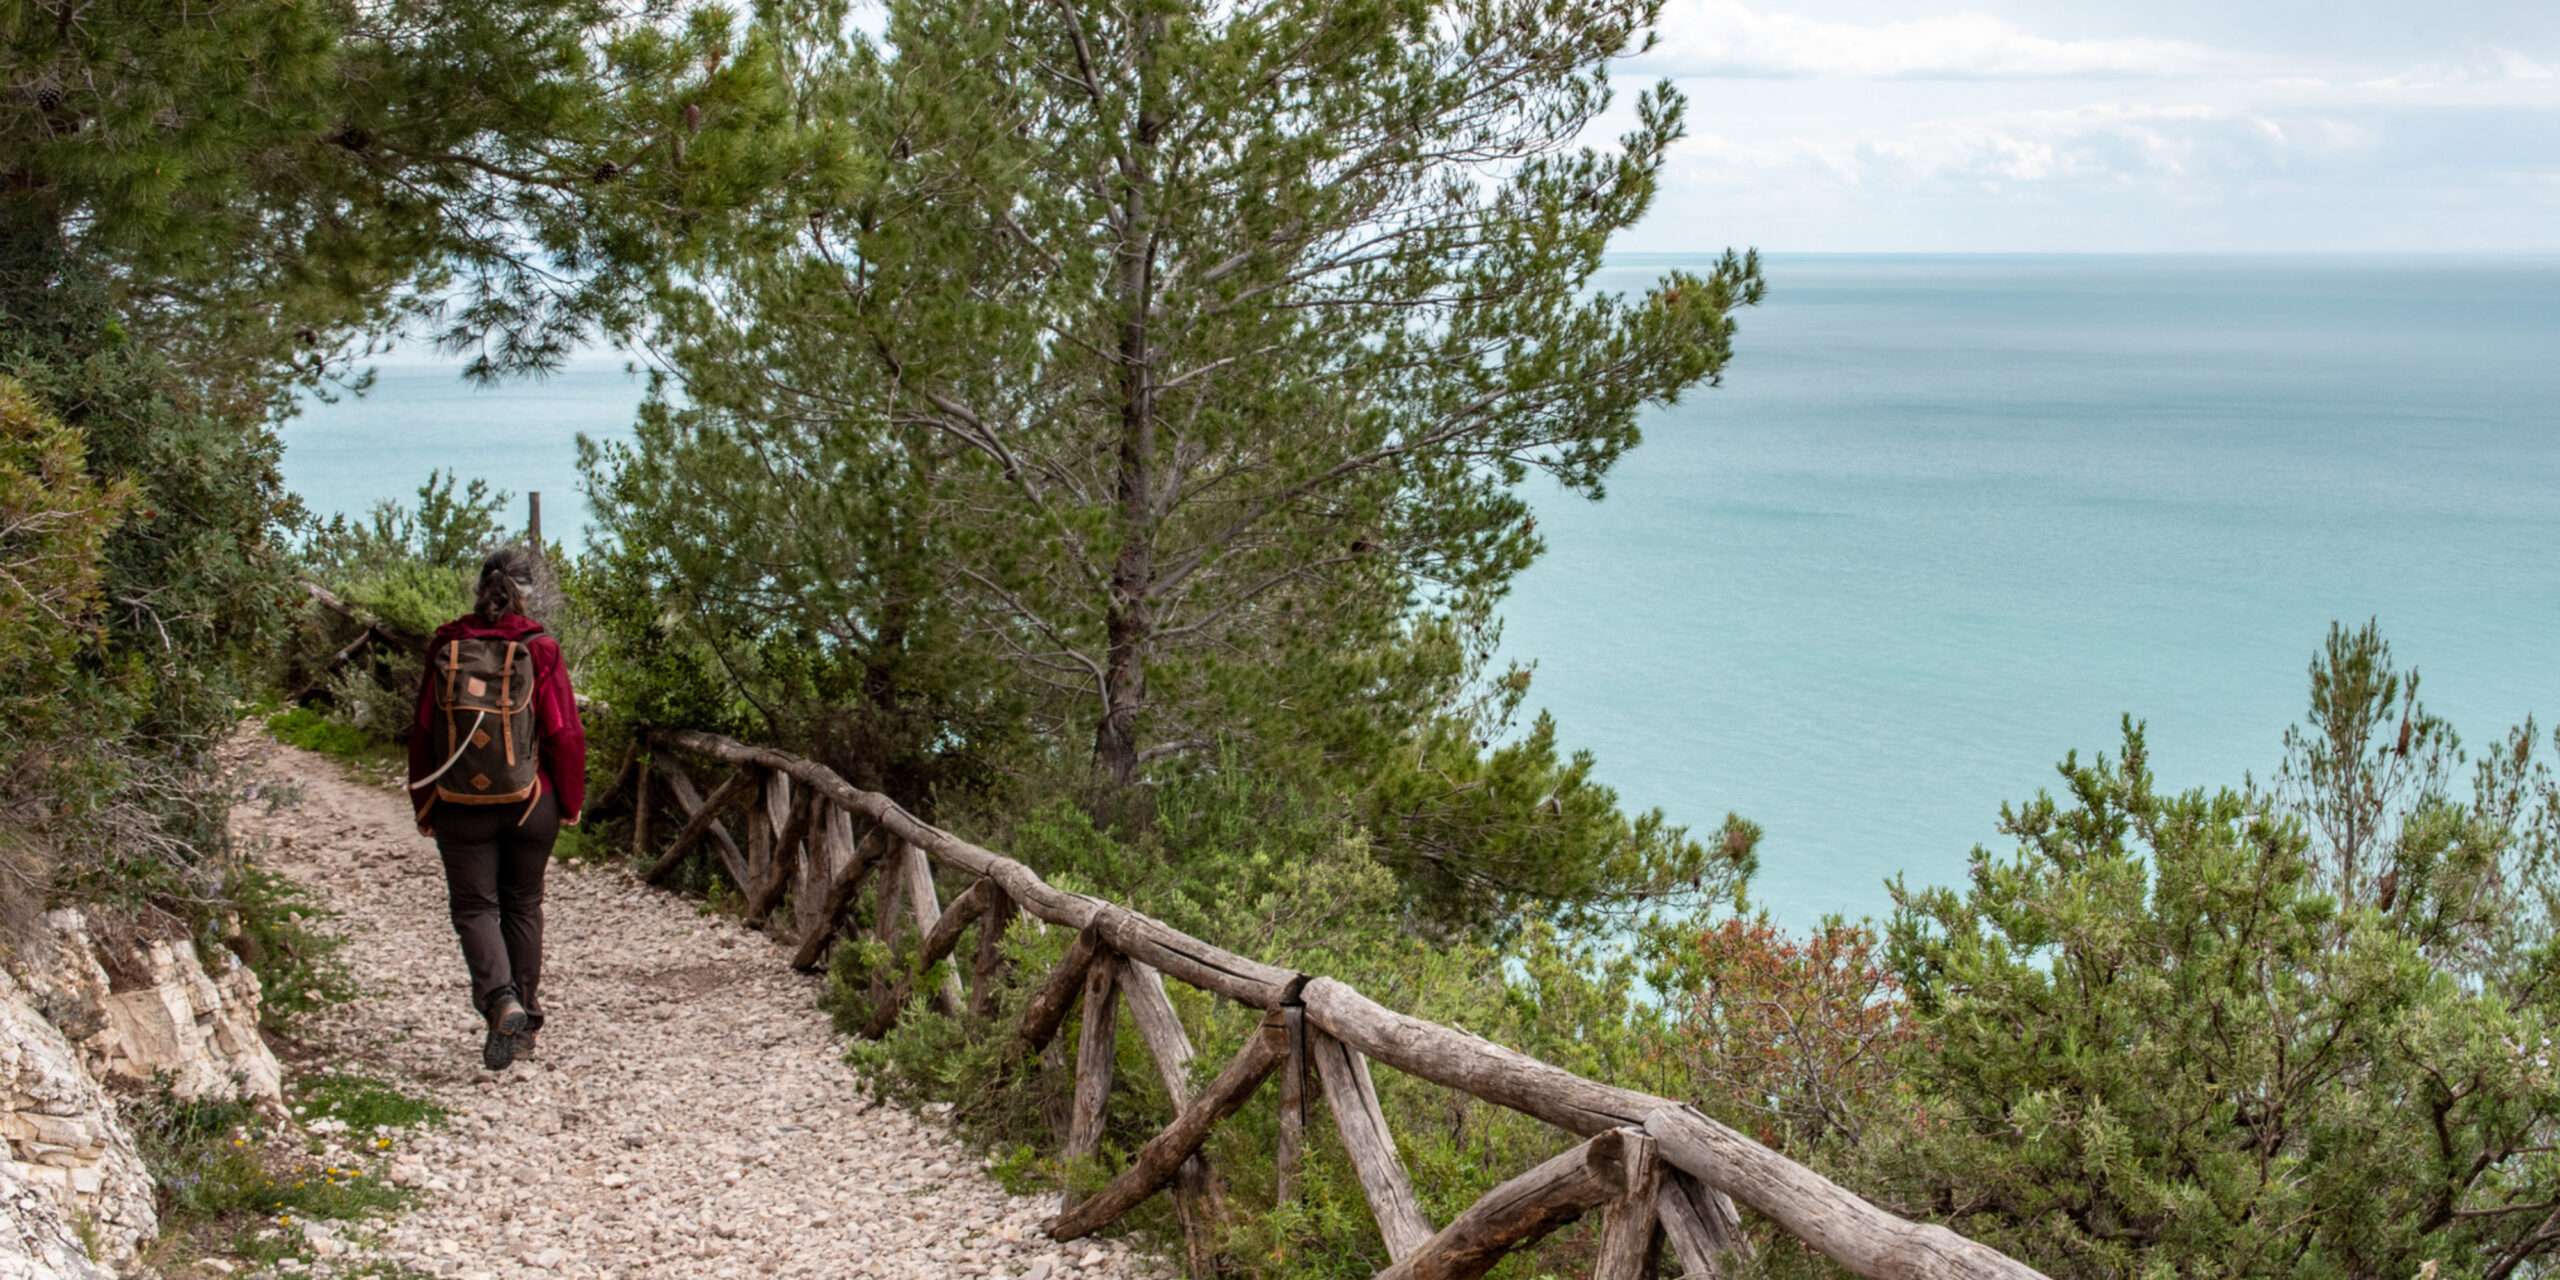 Hitting the Trails: Hiking and Nature in Puglia, Italy